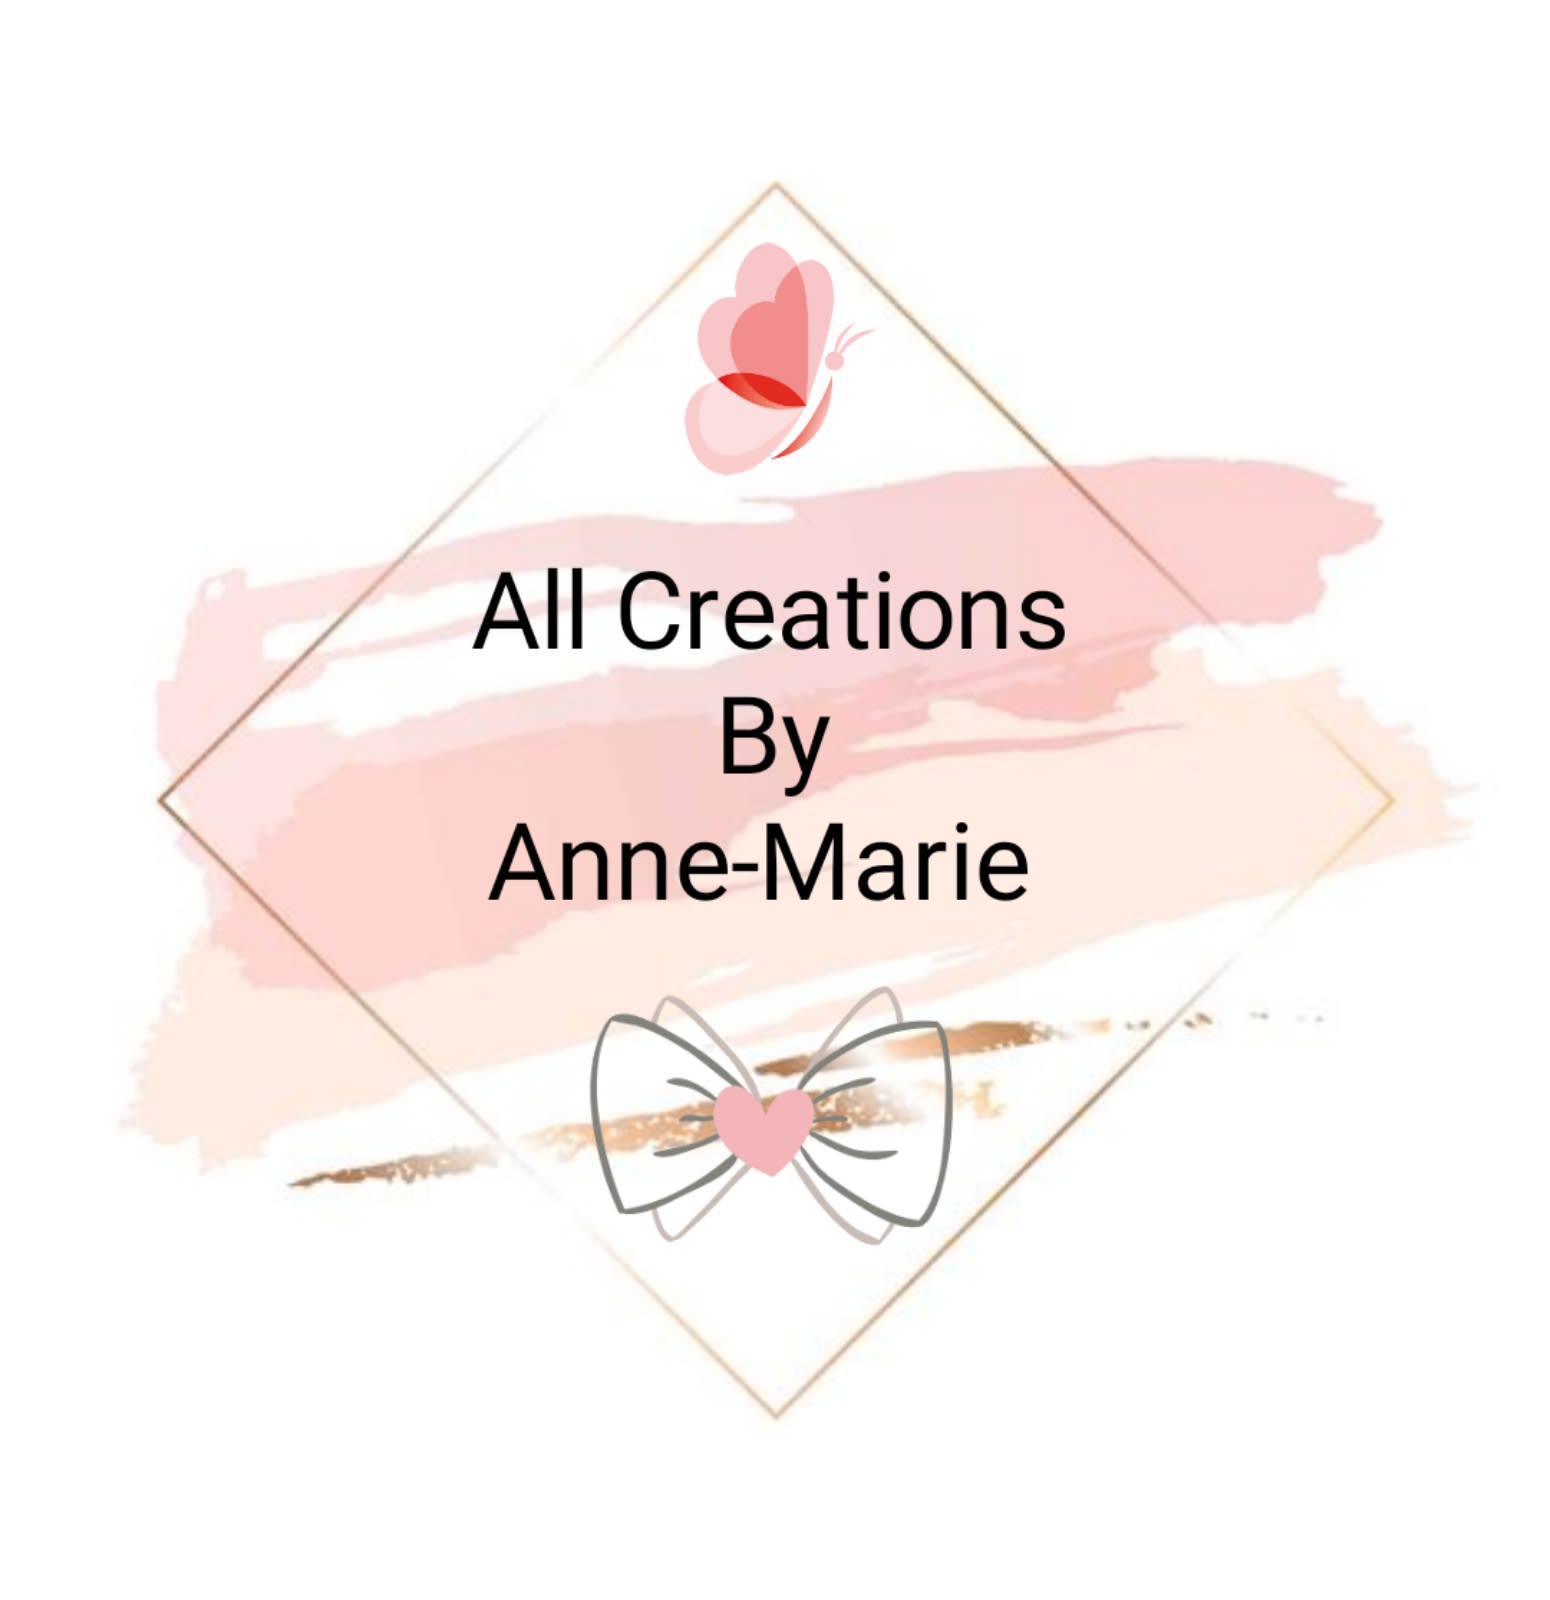 All Creations By Anne-Marie